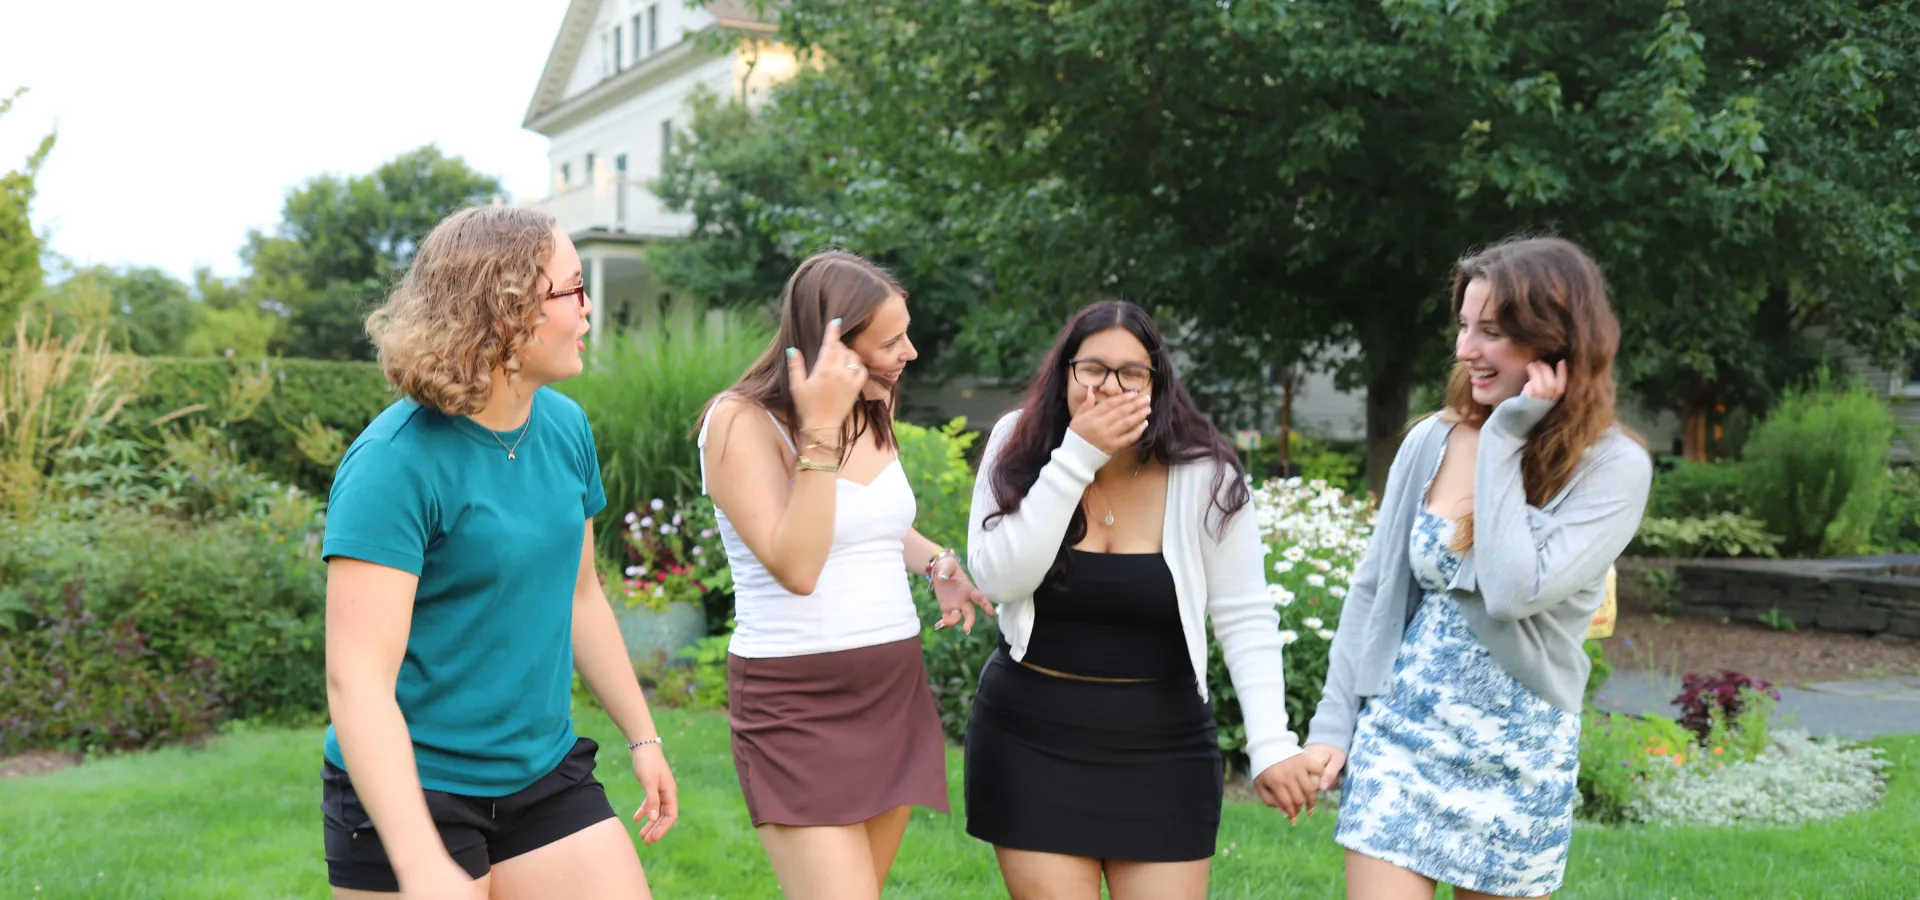 Four Precollege students laughing together.